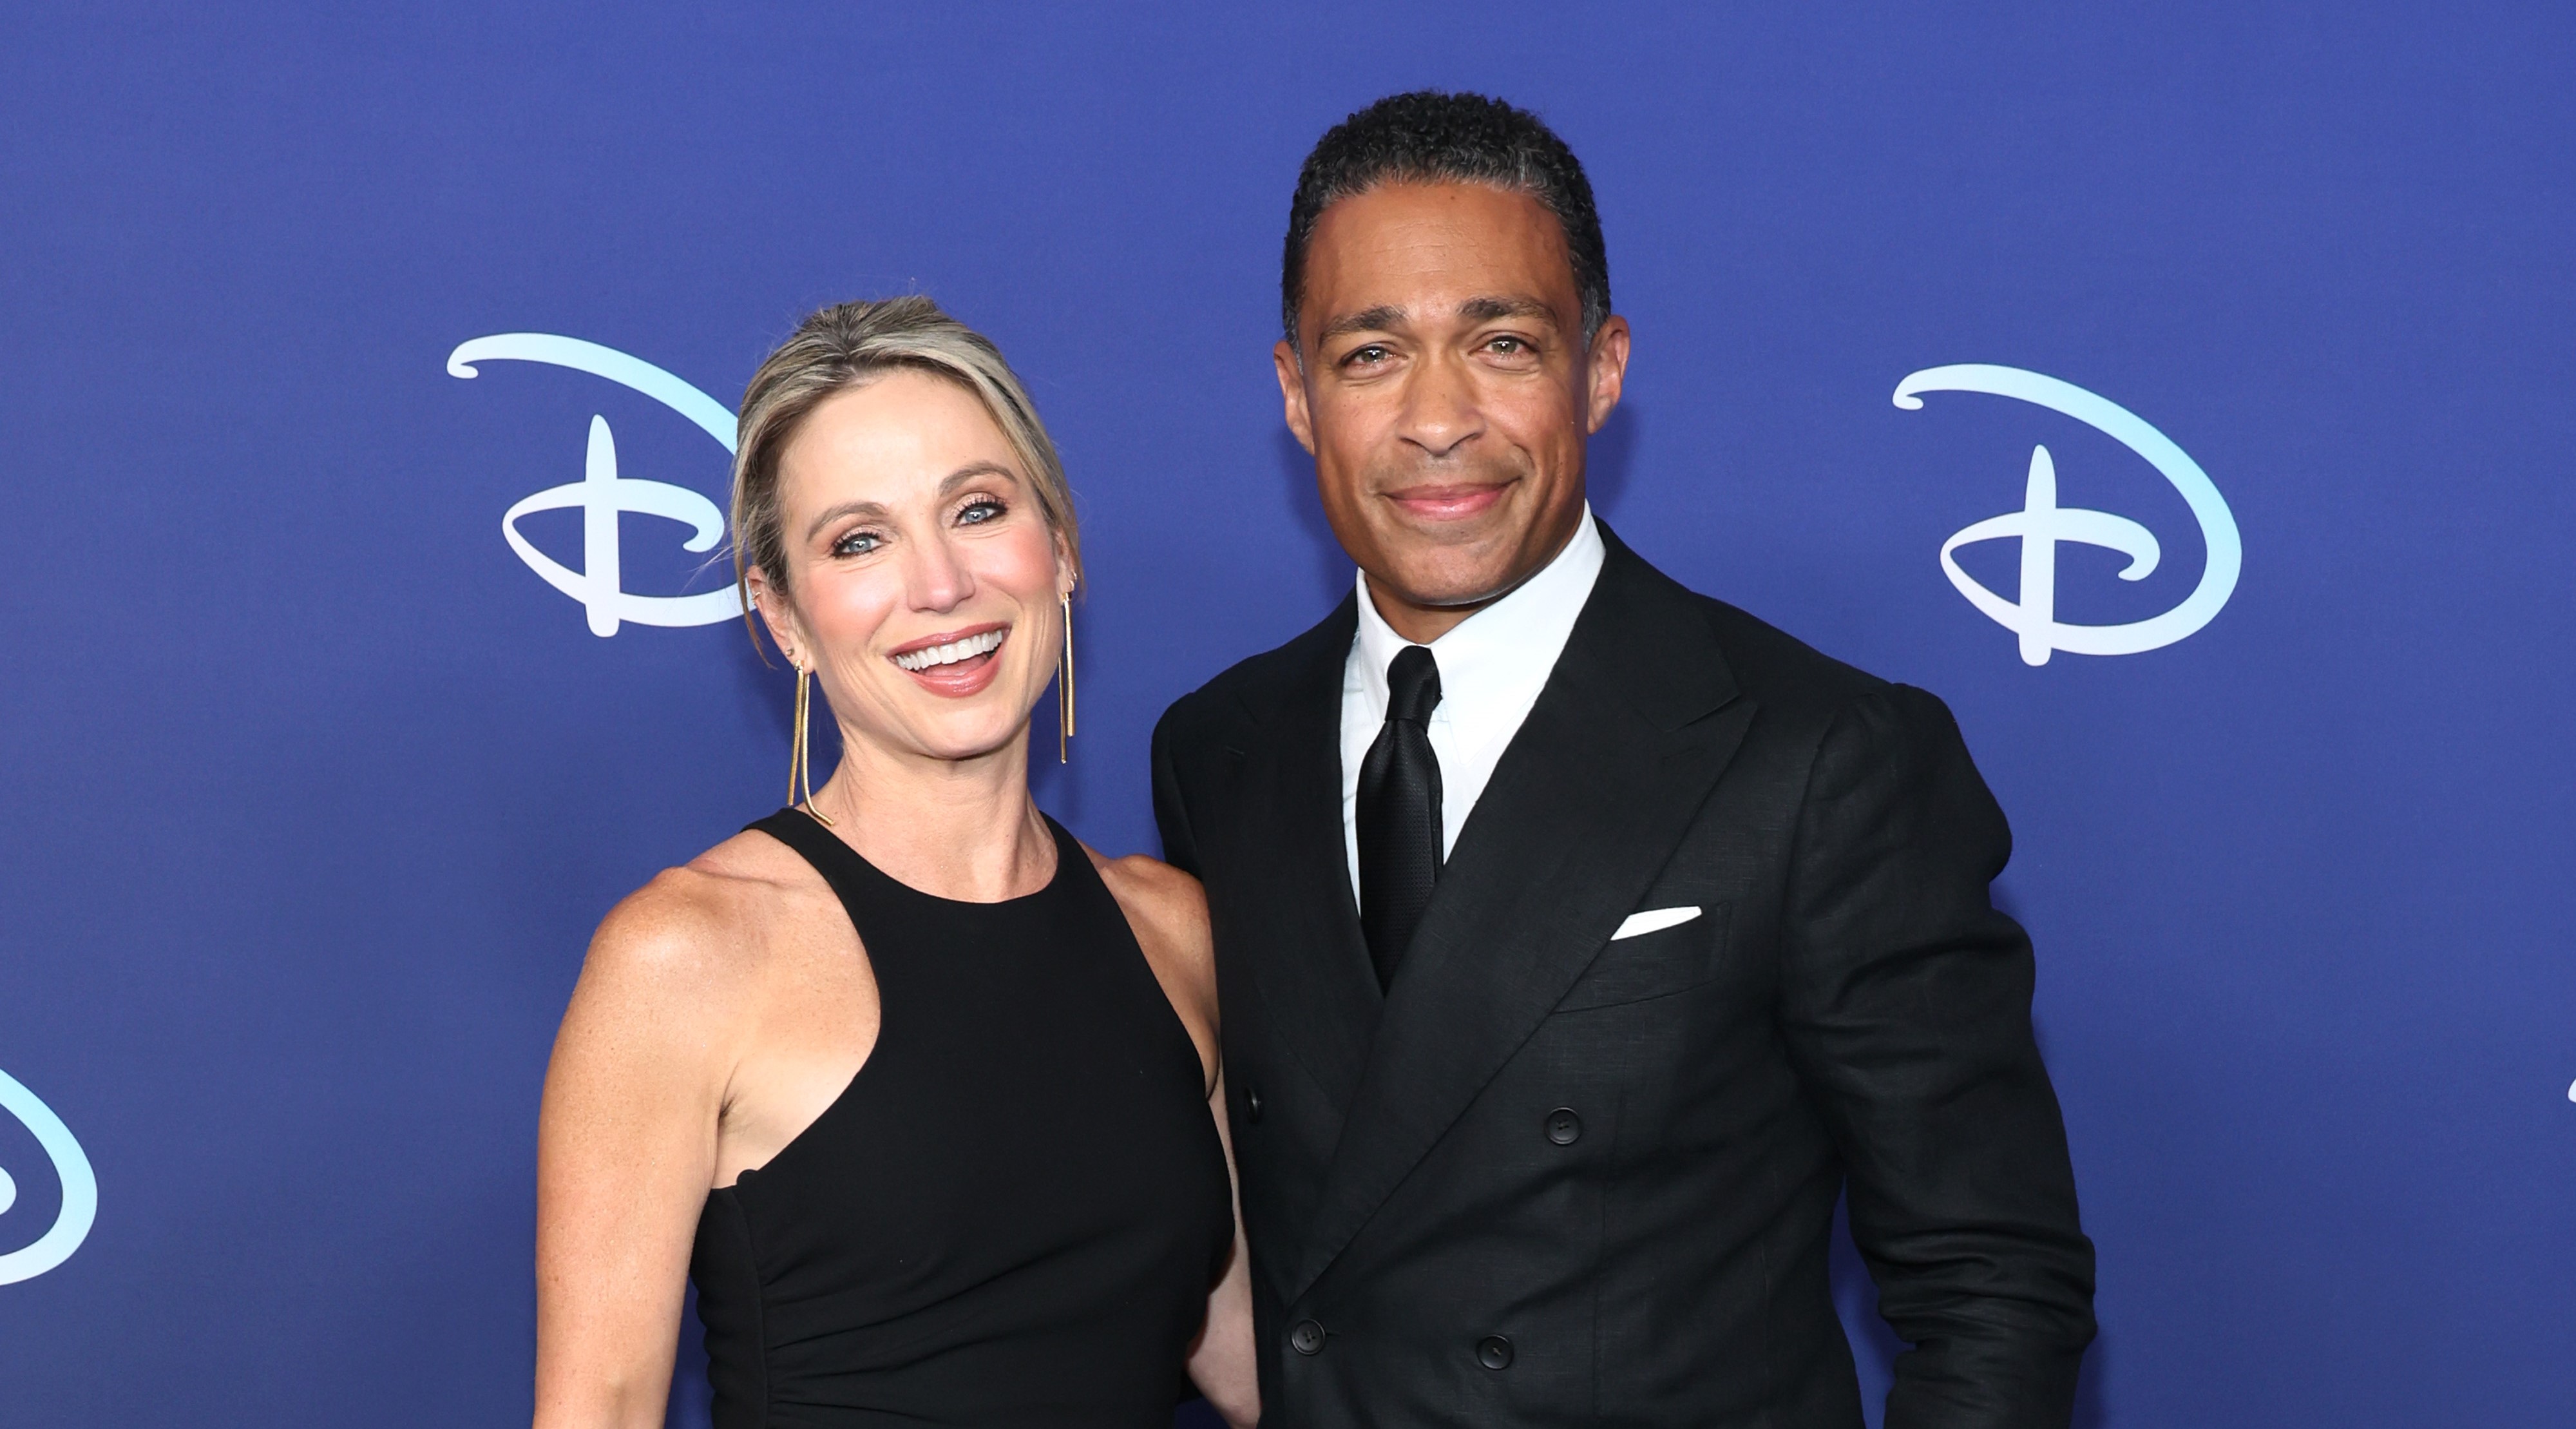 Amy Robach and T.J. Holmes attend the 2022 ABC Disney Upfront at Basketball City, on May 17, 2022, in New York City. | Source: Getty Images